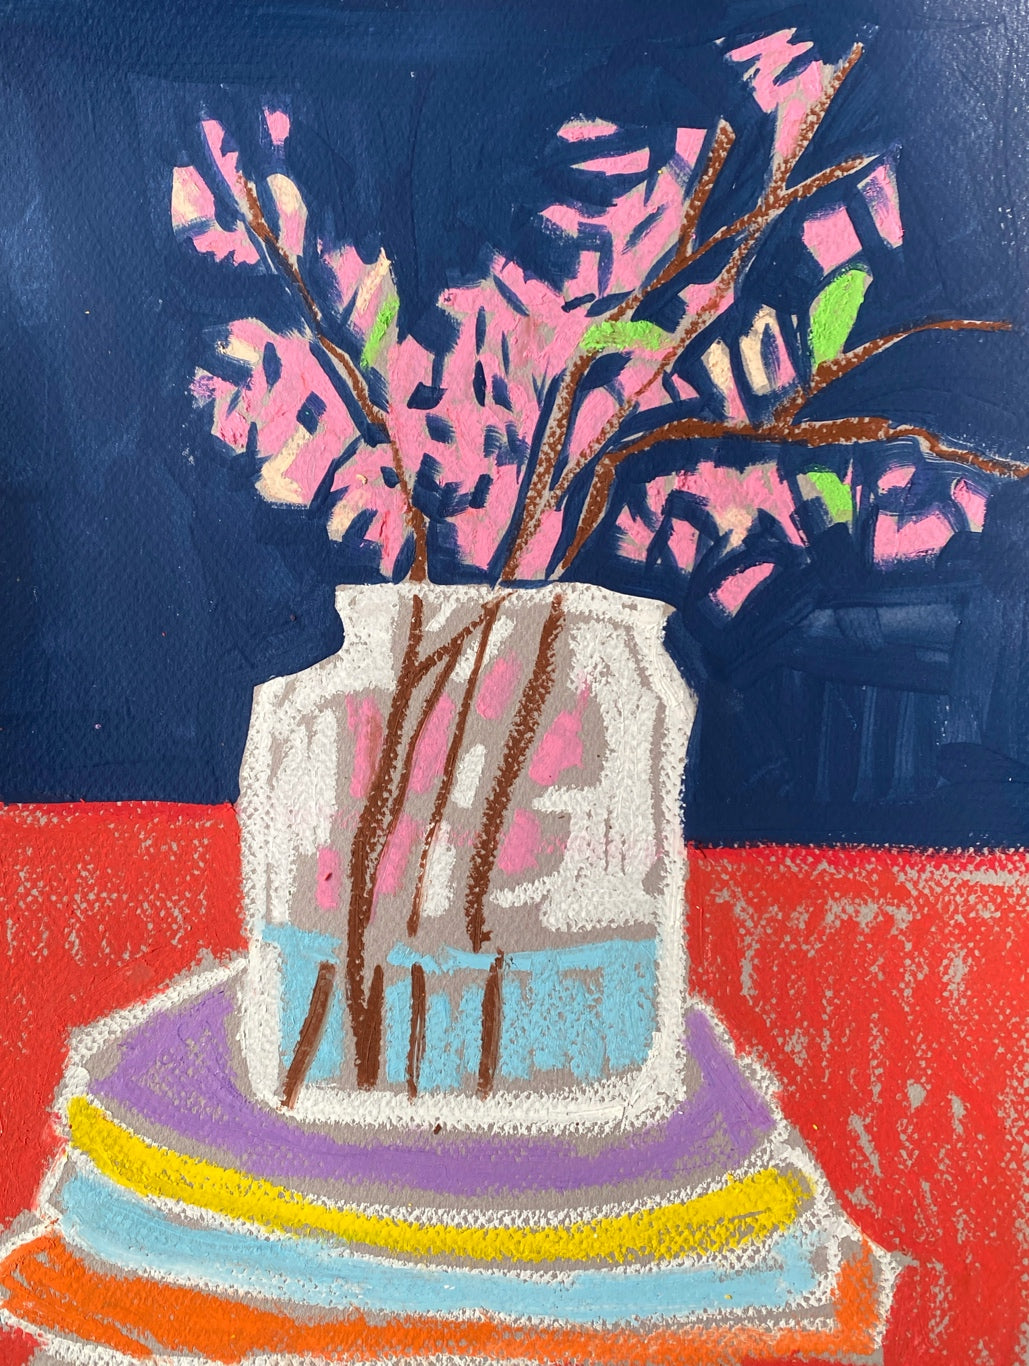 Vase with spring Branches /  Pink Blossoms / Stacked plates/ 12”x9” original art on paper